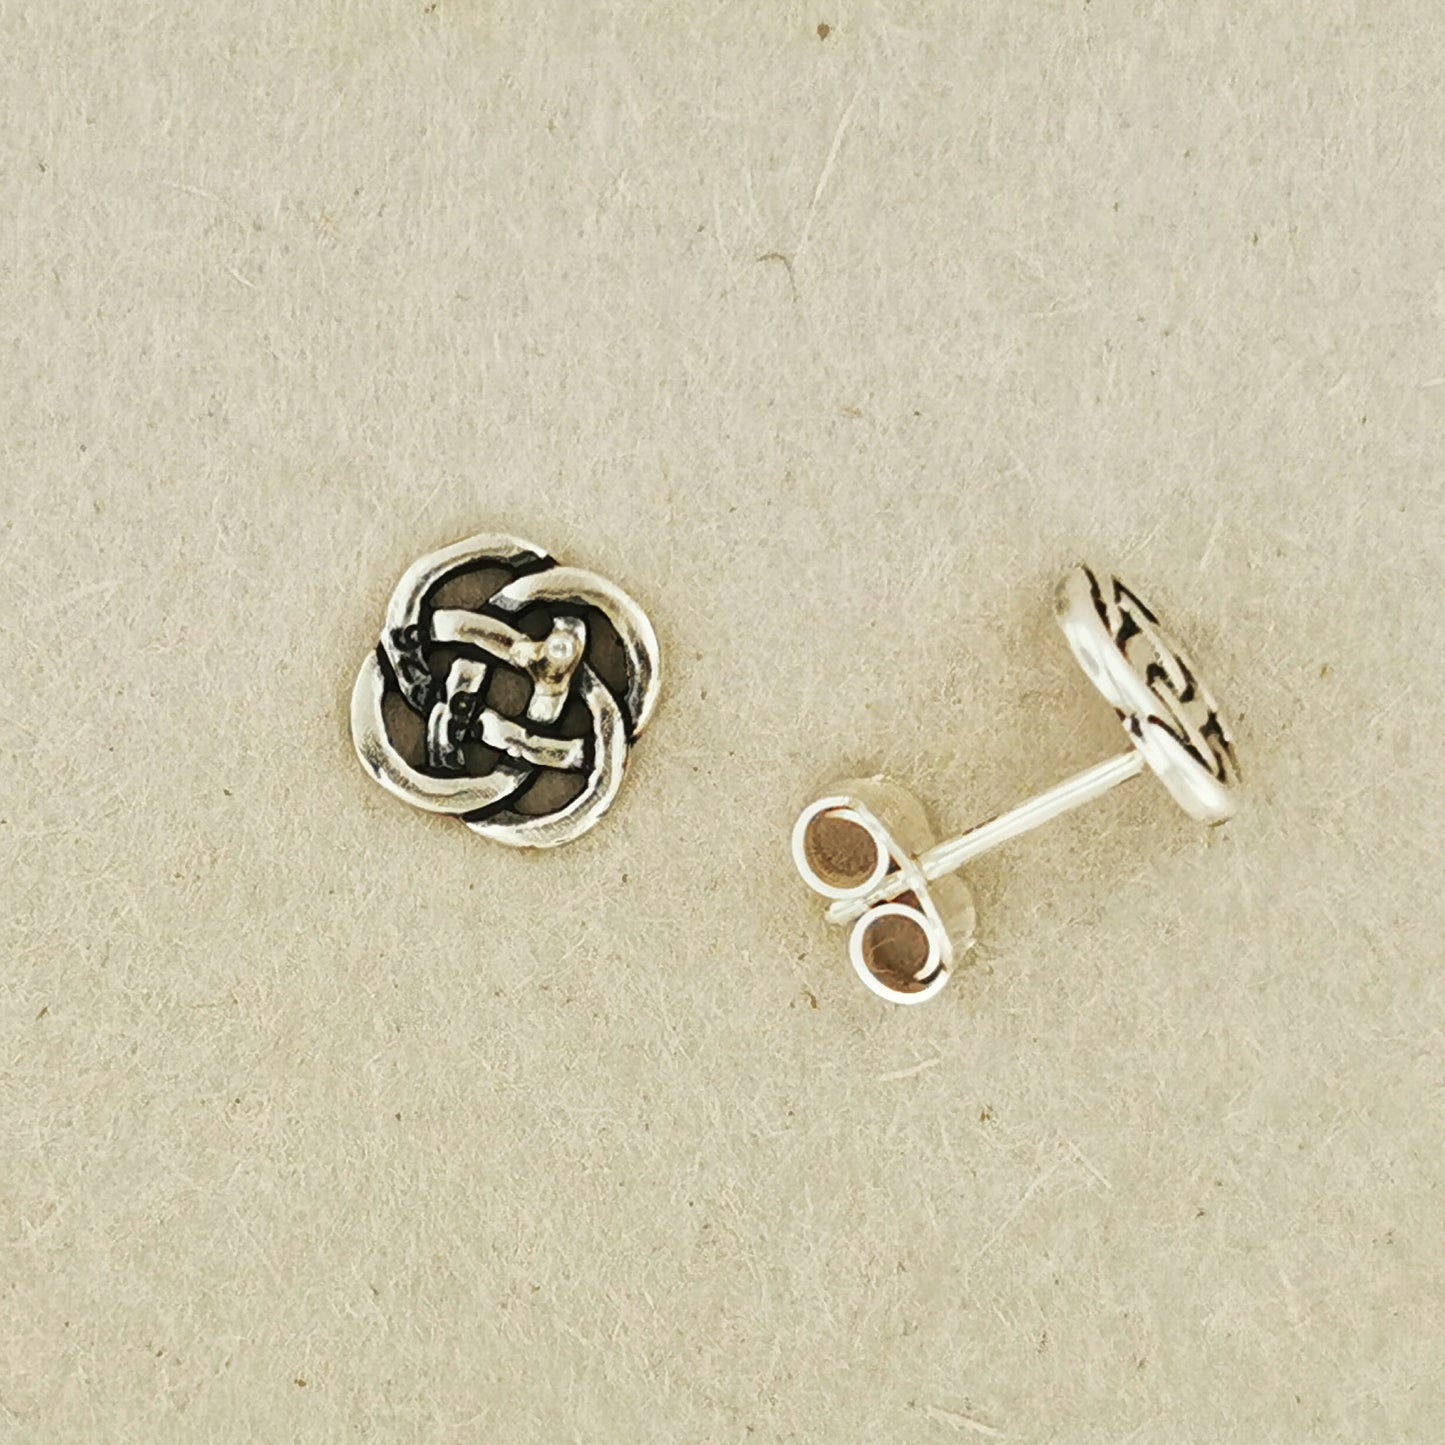 Small Endless Knotwork Stud Earrings in Sterling Silver